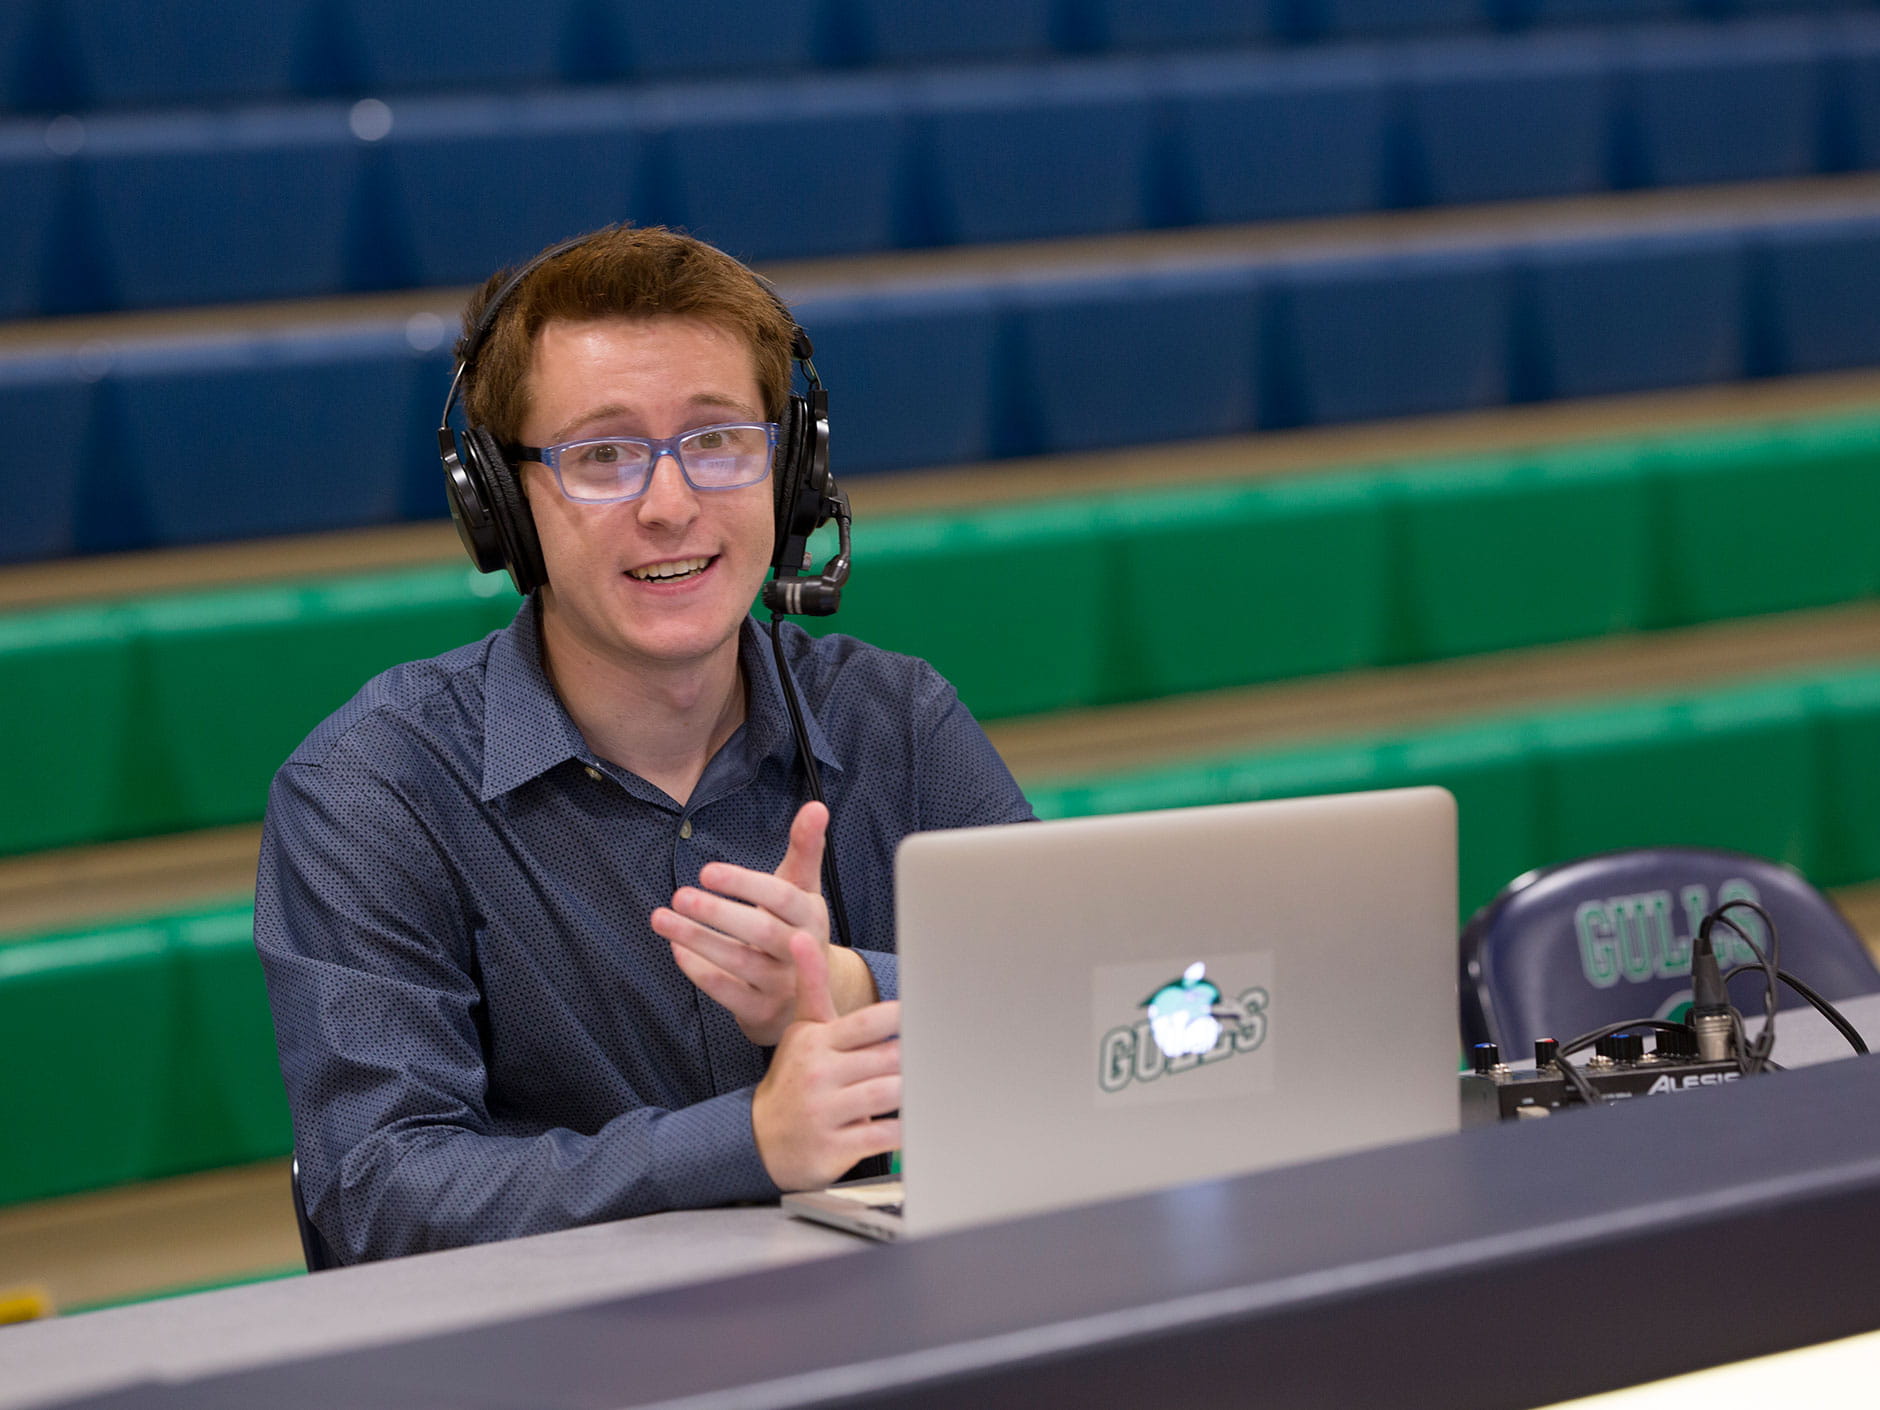 Zach Weiss '18 broadcasting at a scorer's table